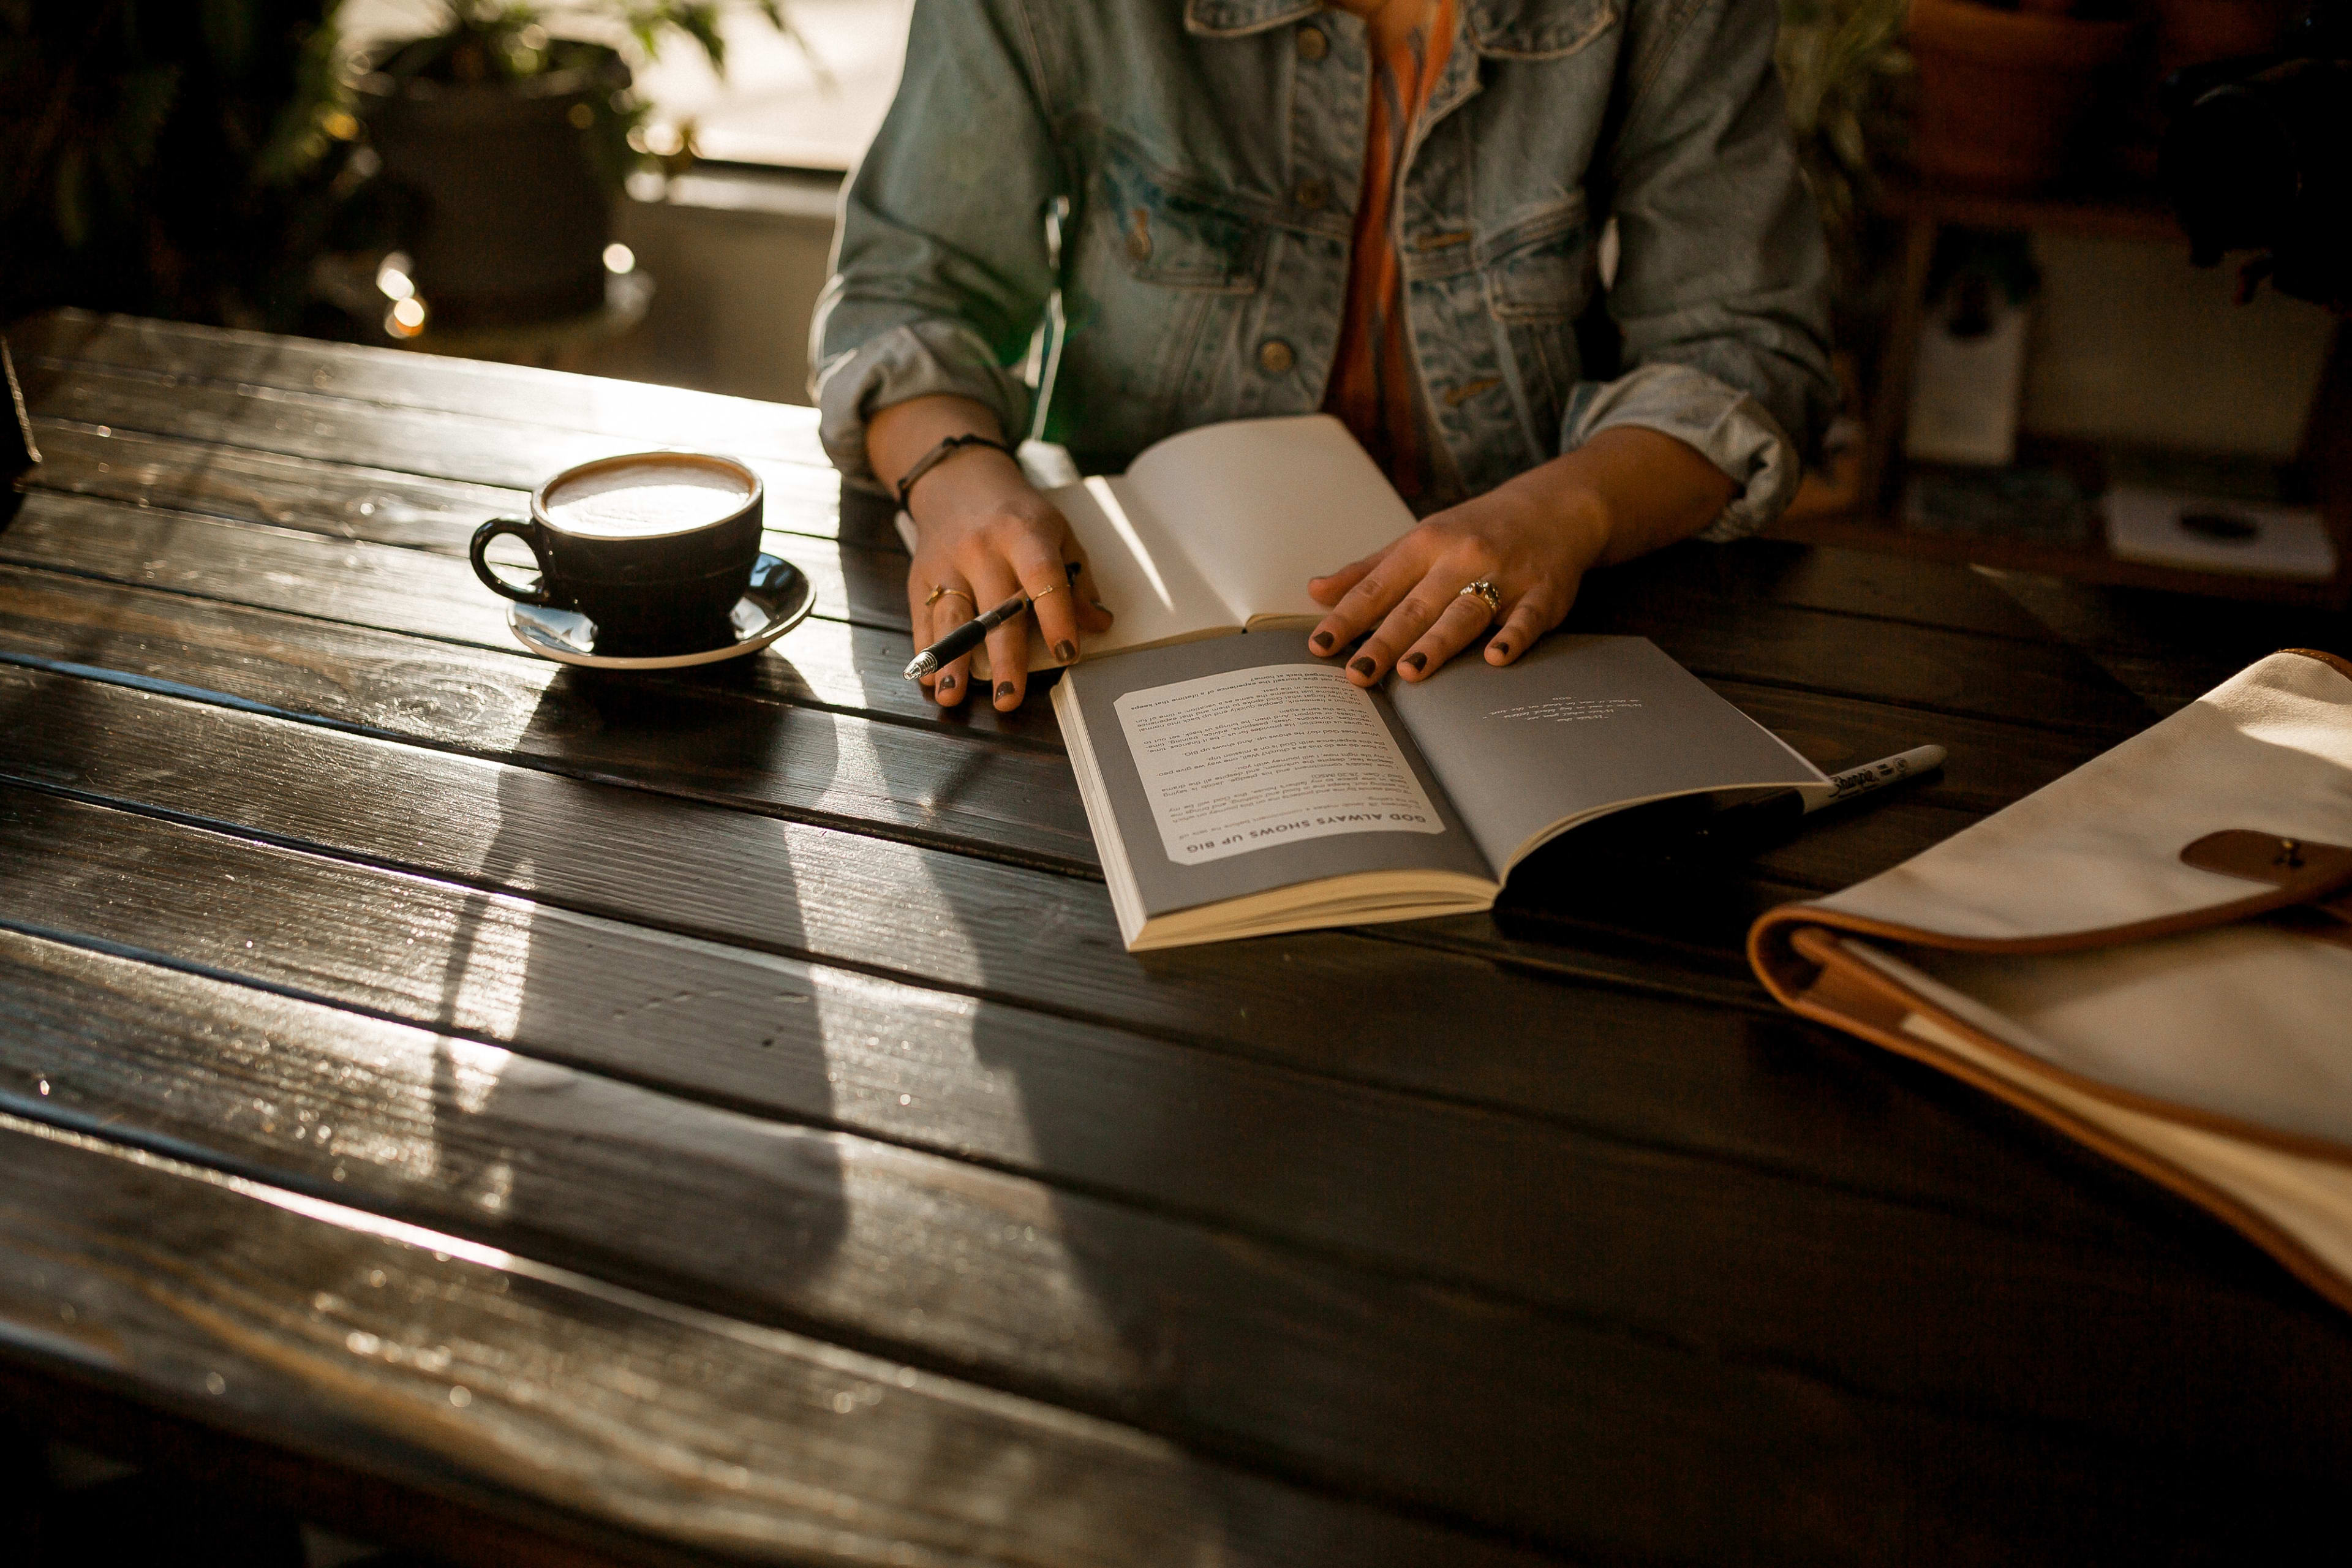 Person sitting at table, reading book with a cup of coffee